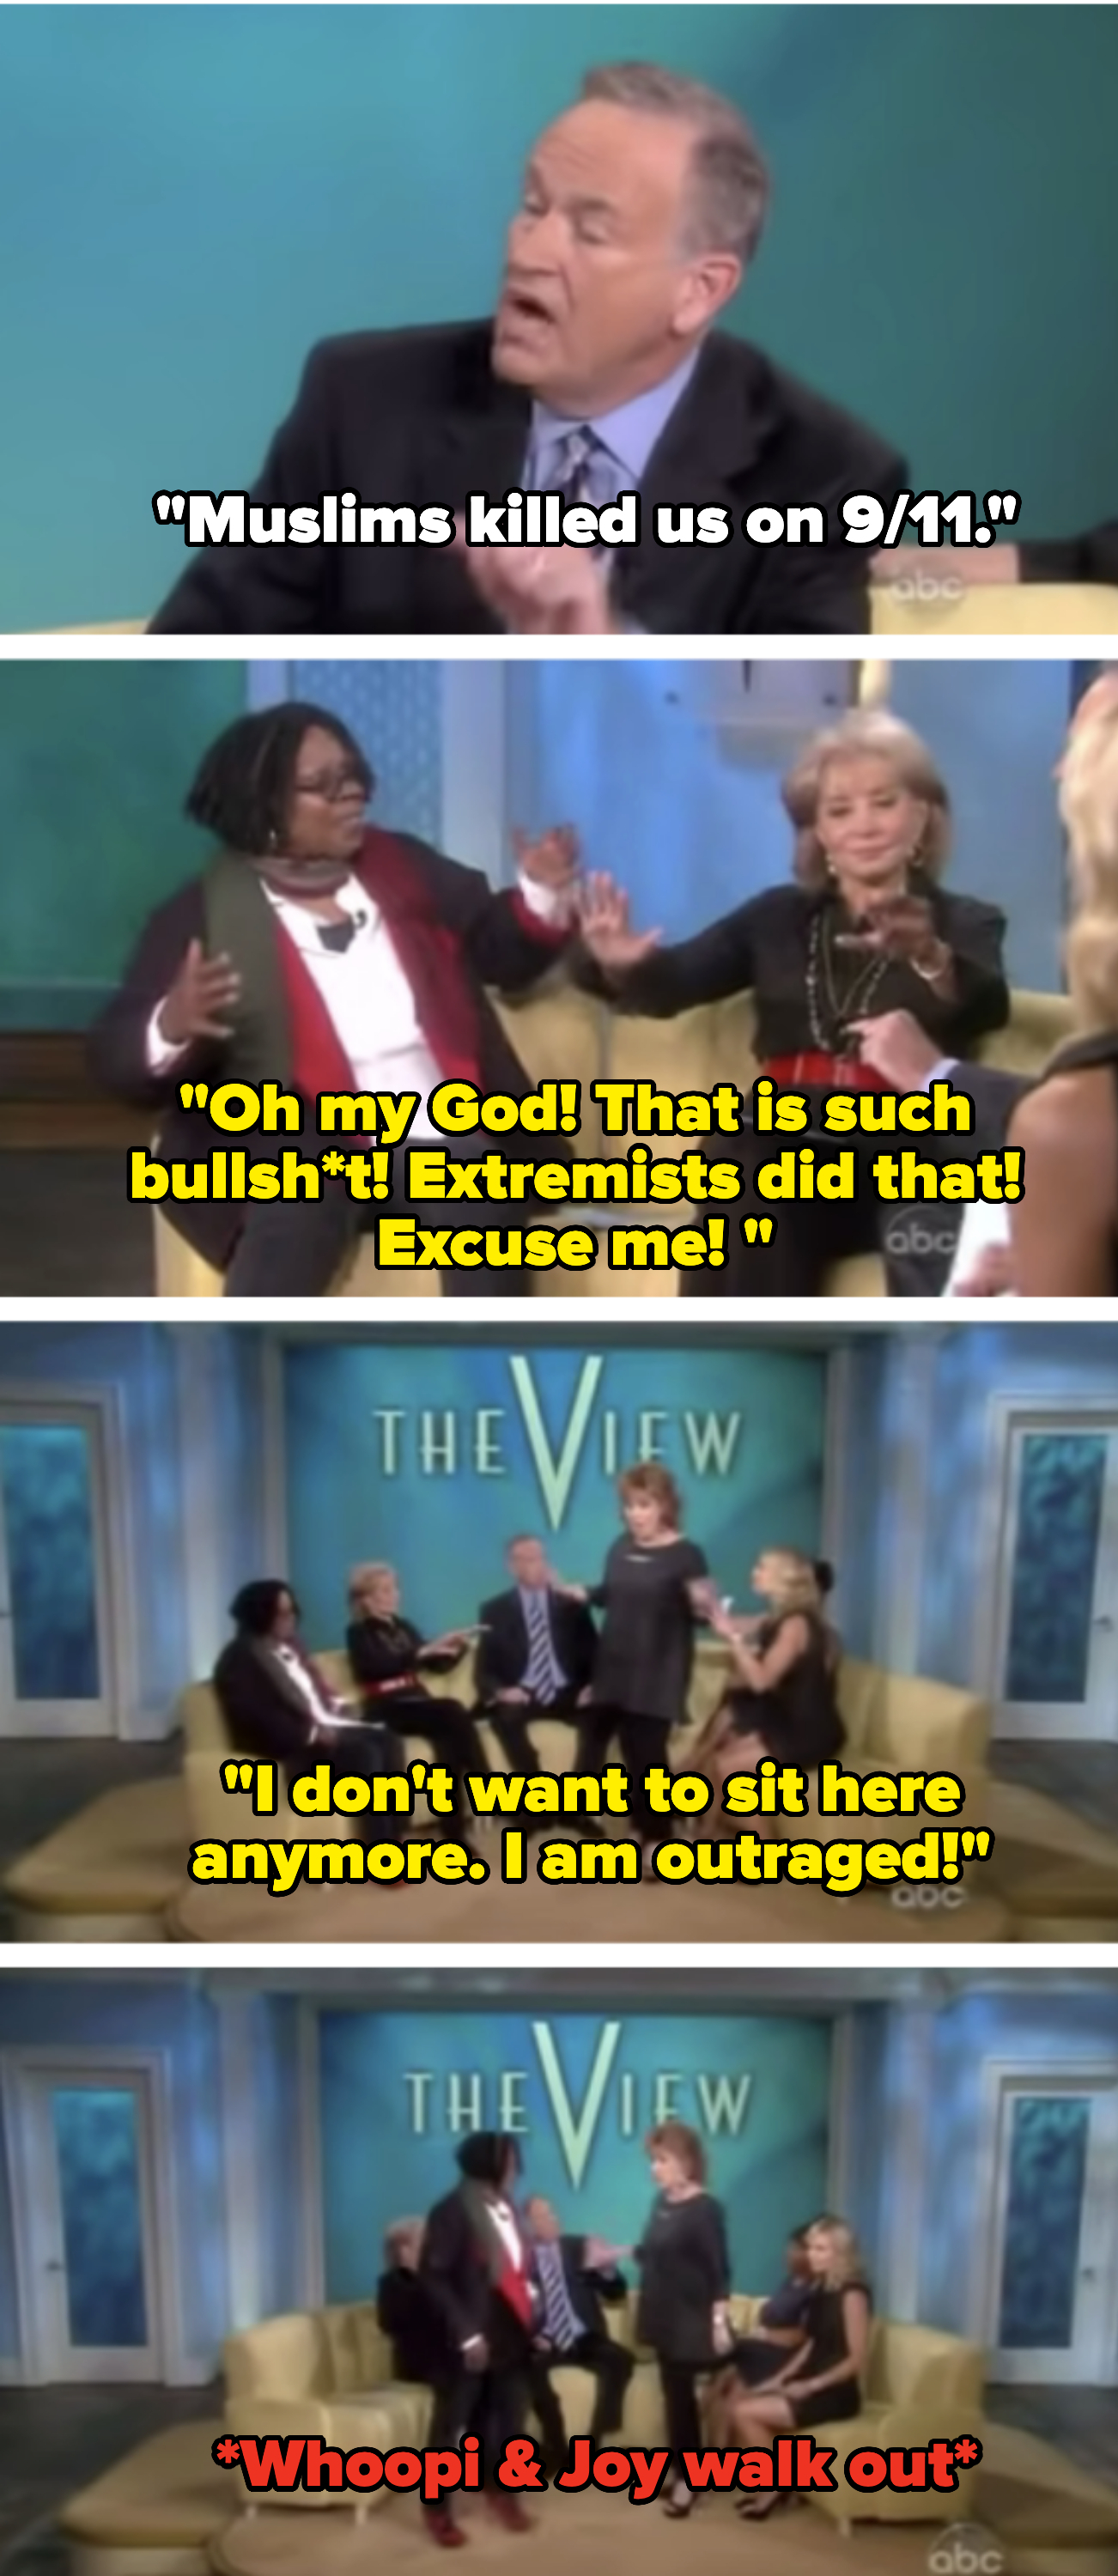 the two women walking out of the view interview